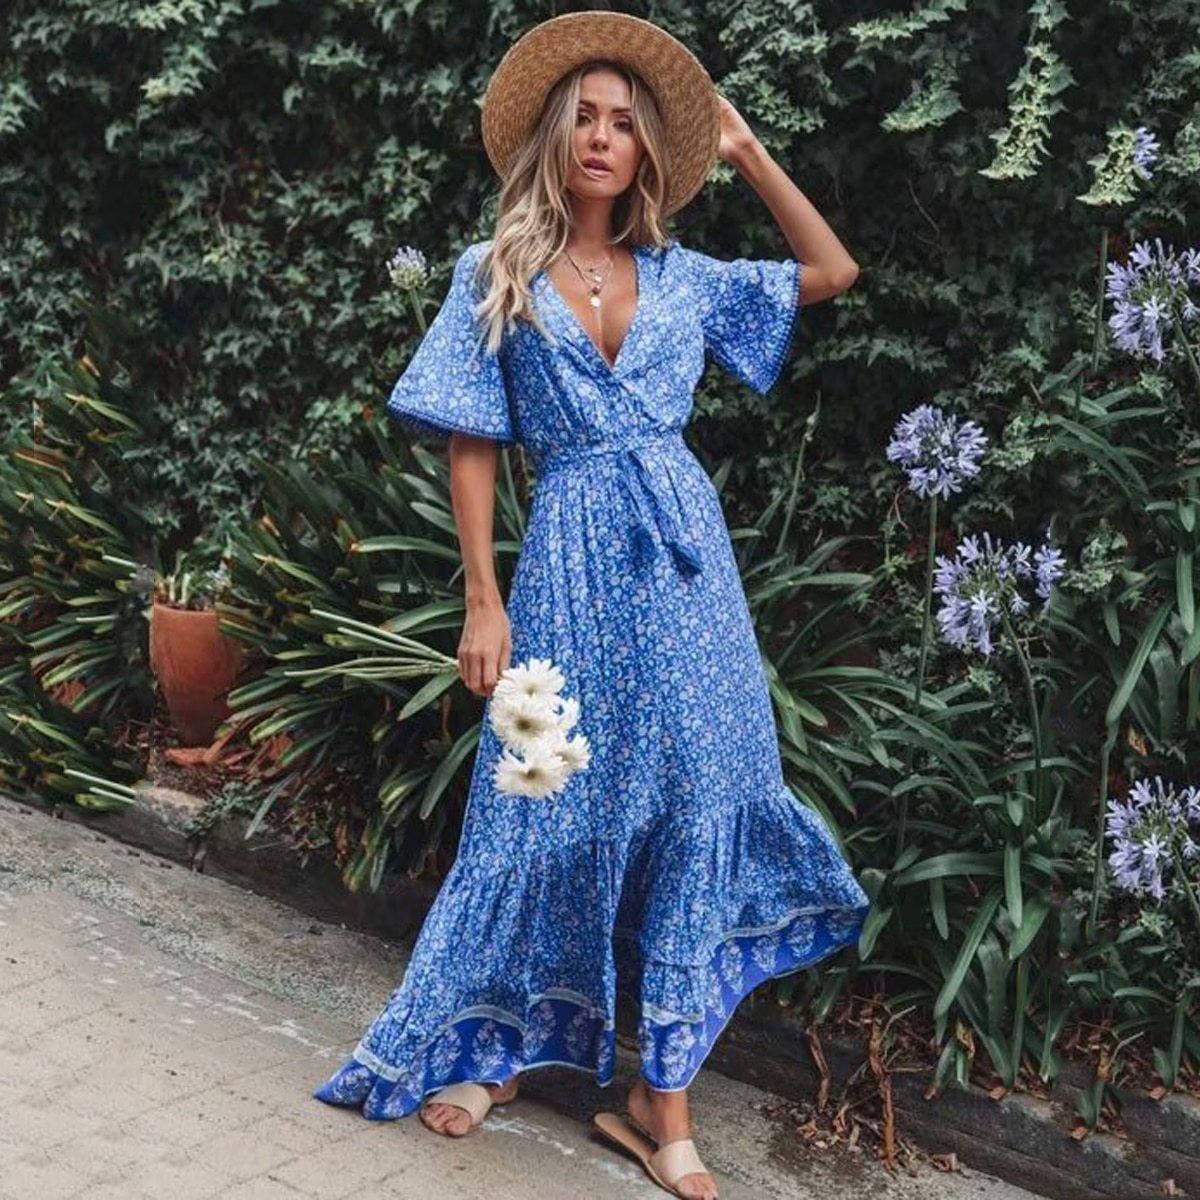 10 Ways to Welcome Boho Style Into Your Wardrobe | Joe Browns